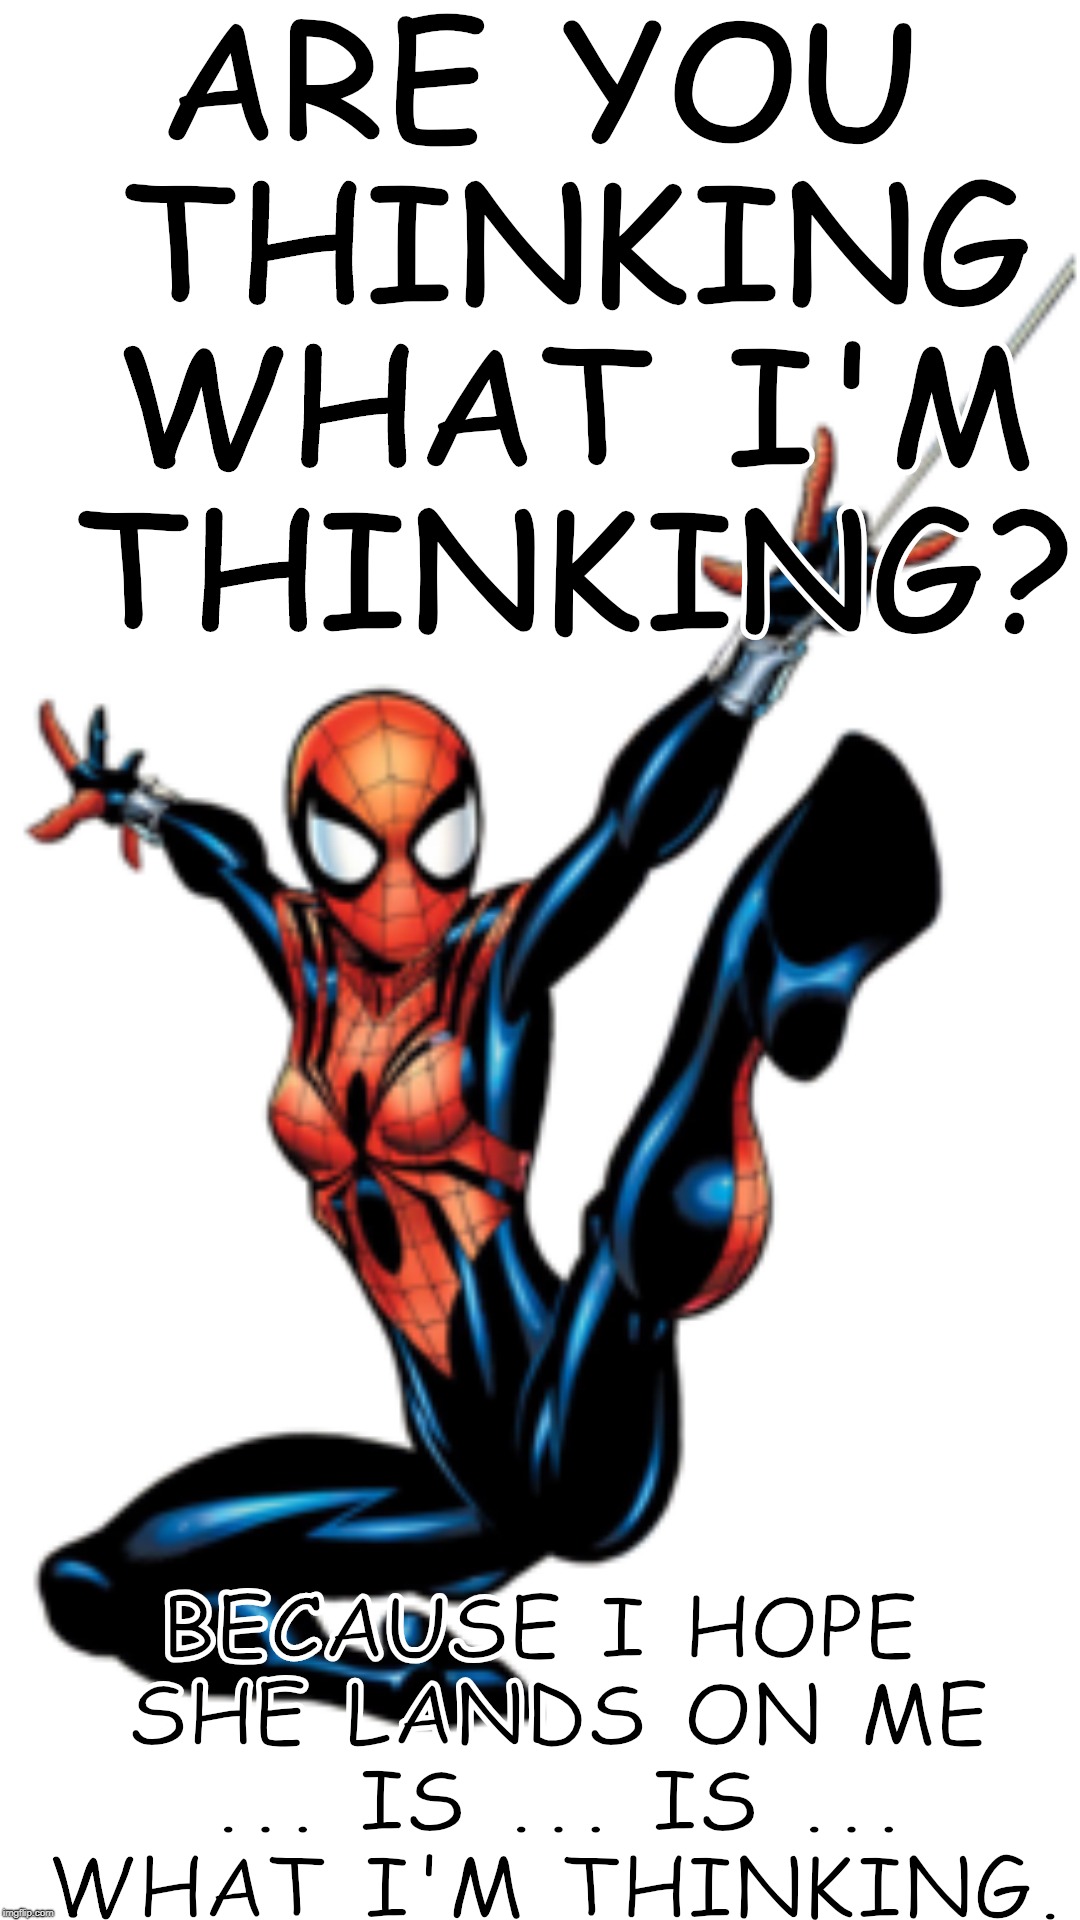 Are you thinking what I'm thinking? | ARE YOU THINKING WHAT I'M THINKING? BECAUSE I HOPE SHE LANDS ON ME ... IS ... IS ... WHAT I'M THINKING. | image tagged in sexy,spider,girl,squats | made w/ Imgflip meme maker